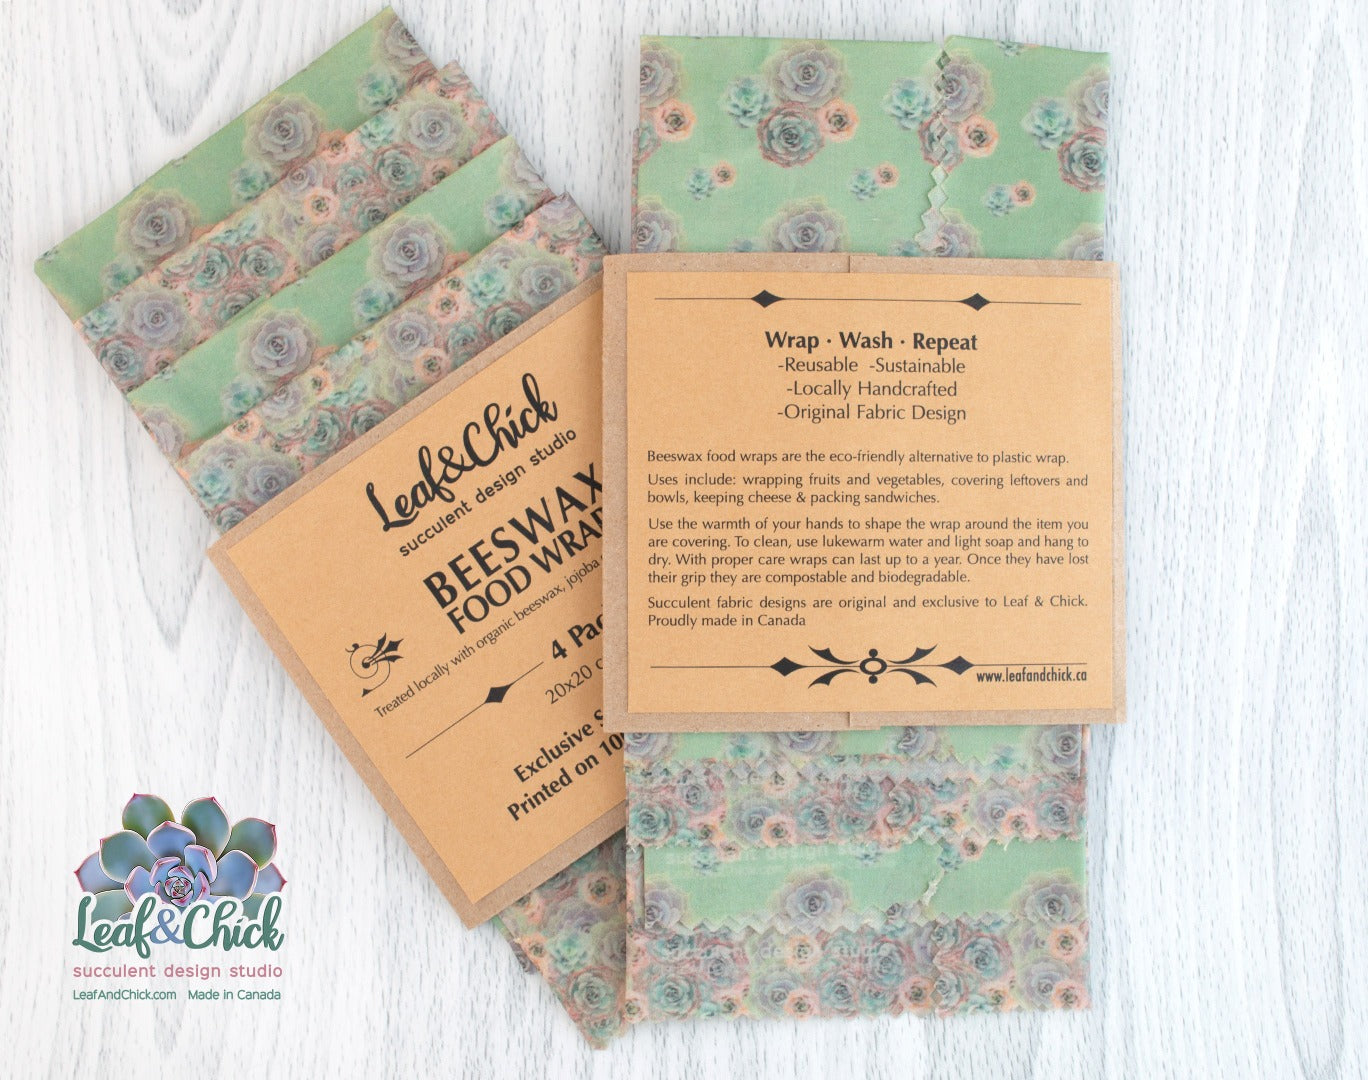 Leaf & Chick beeswax food wraps